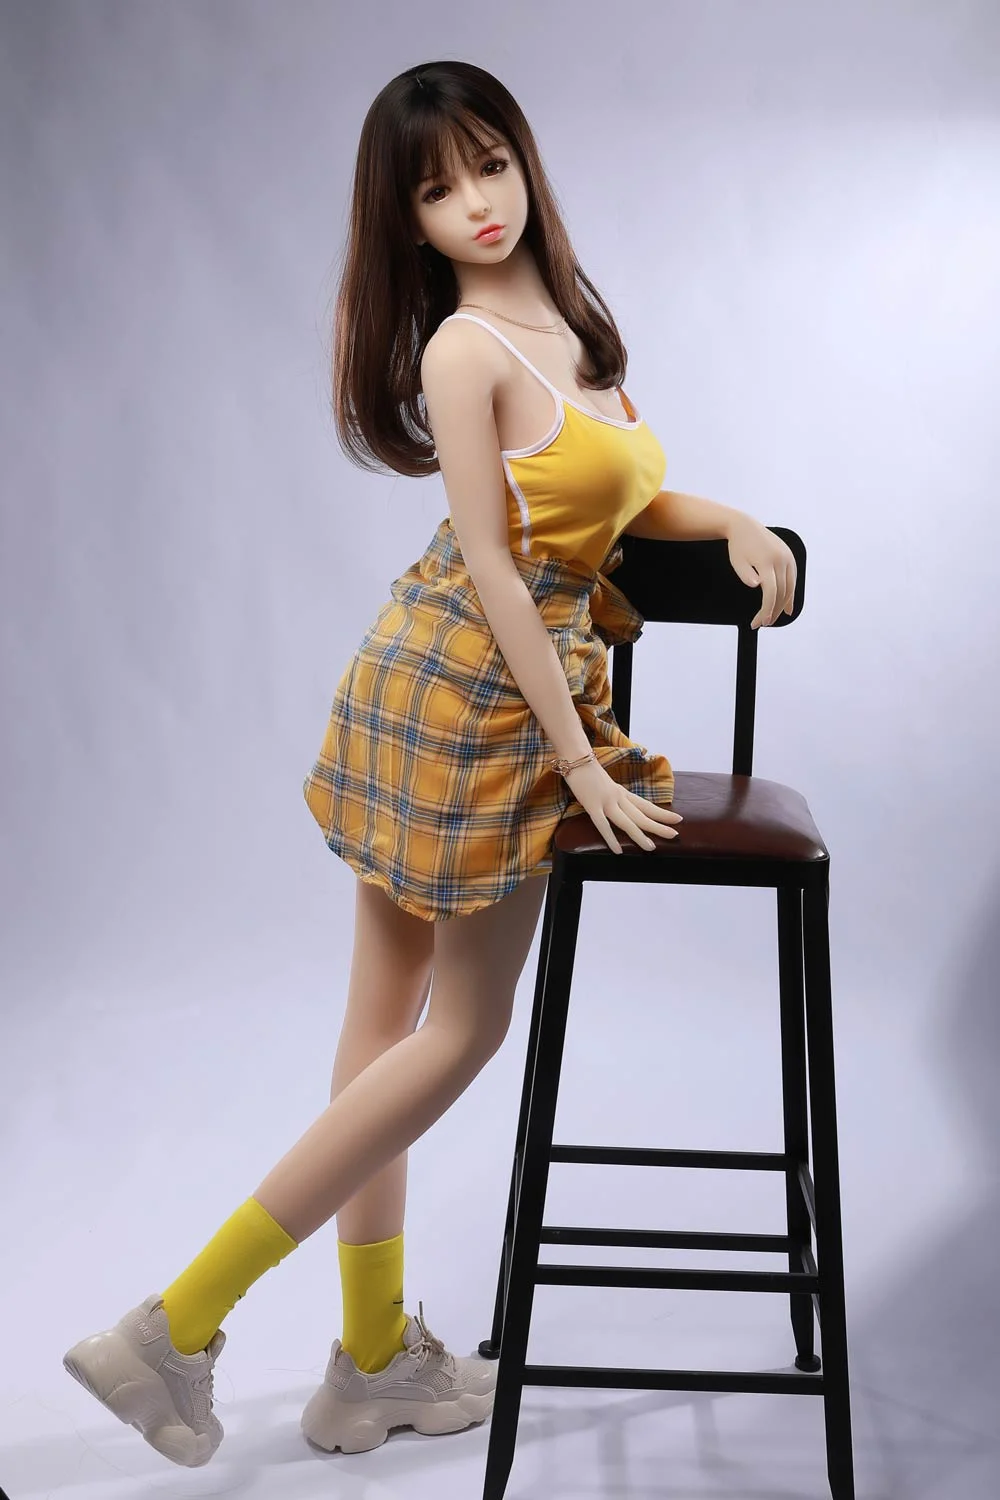 Mini sex doll with hands on the stool